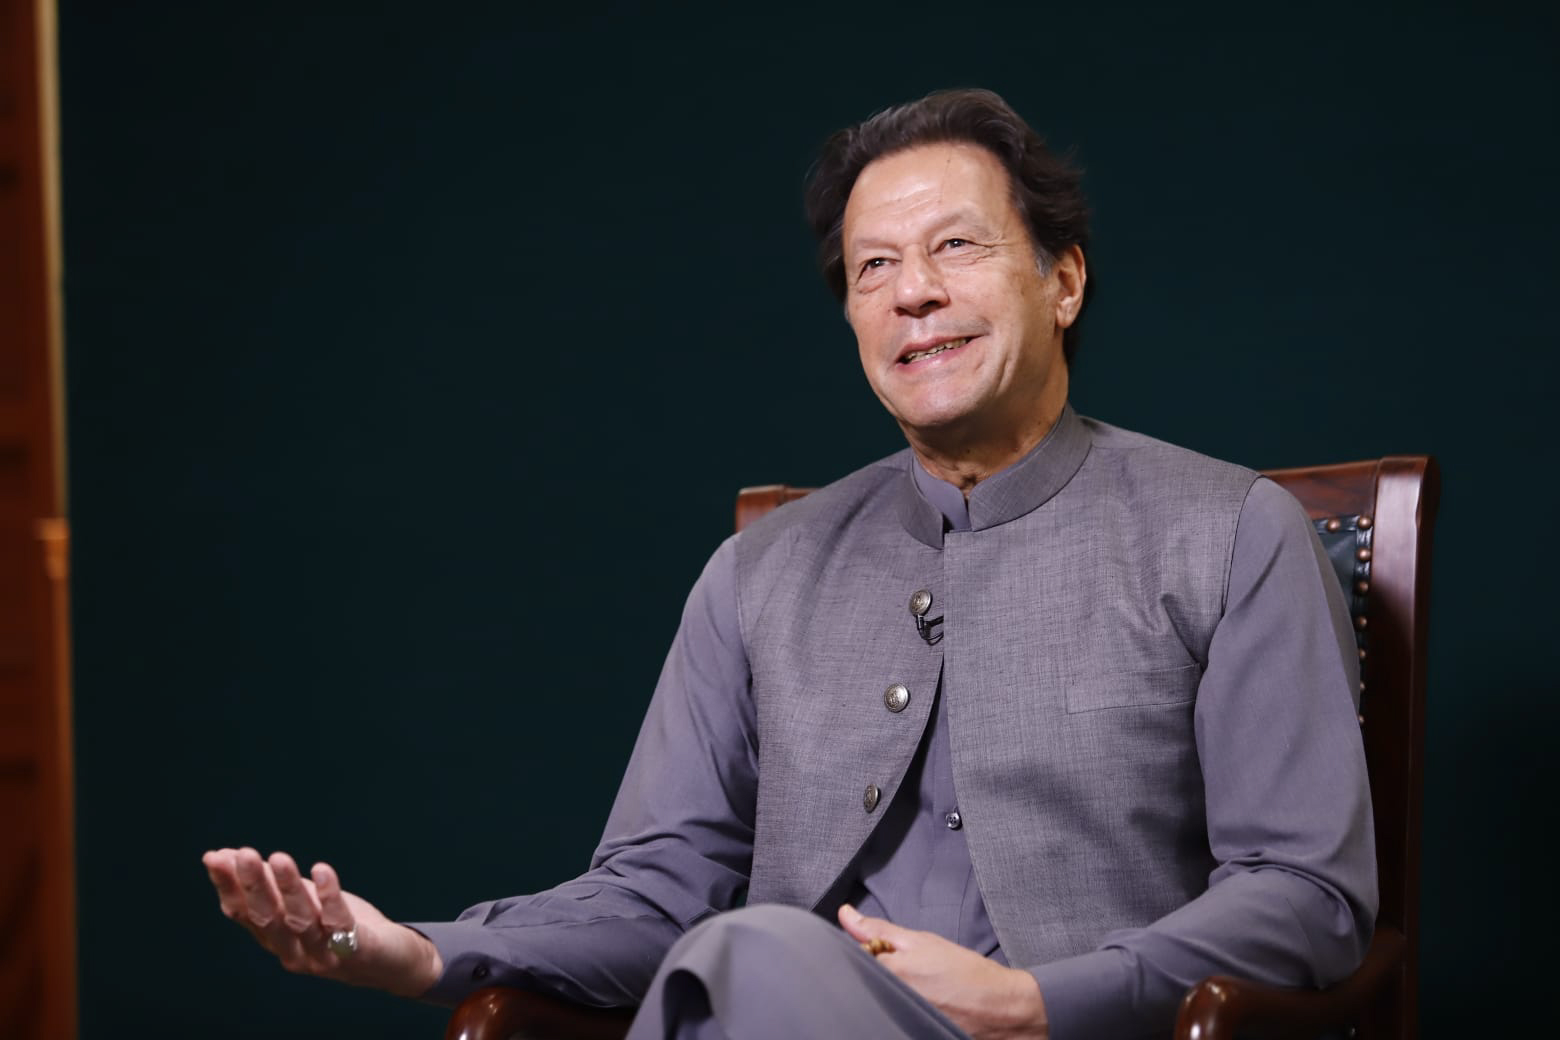 current developments in pakistan may lead to another ‘dhaka tragedy’, warns ex-pm imran khan